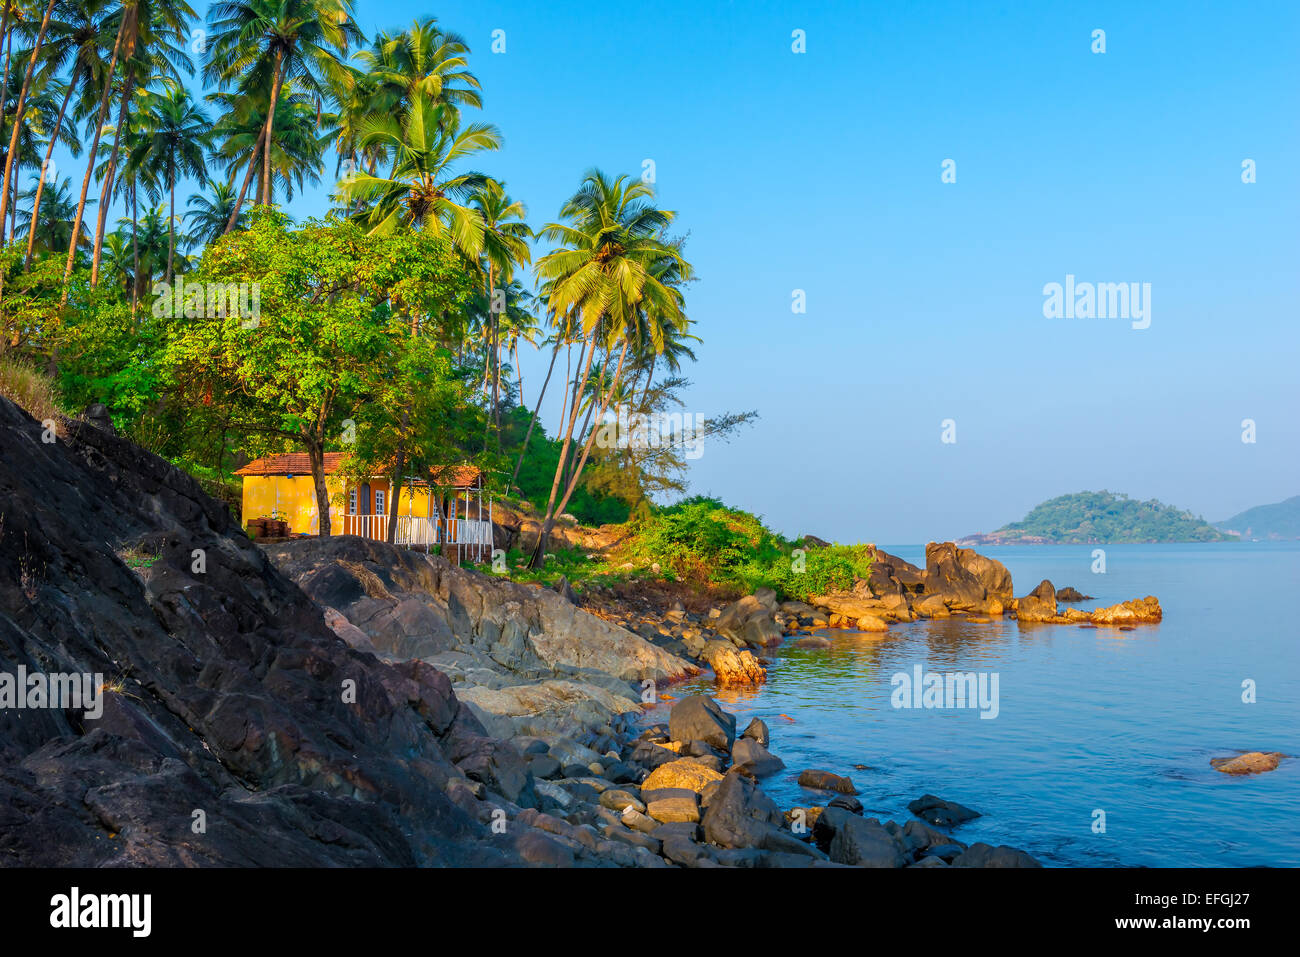 palm trees growing on the rocky shore in heavenly place Stock Photo